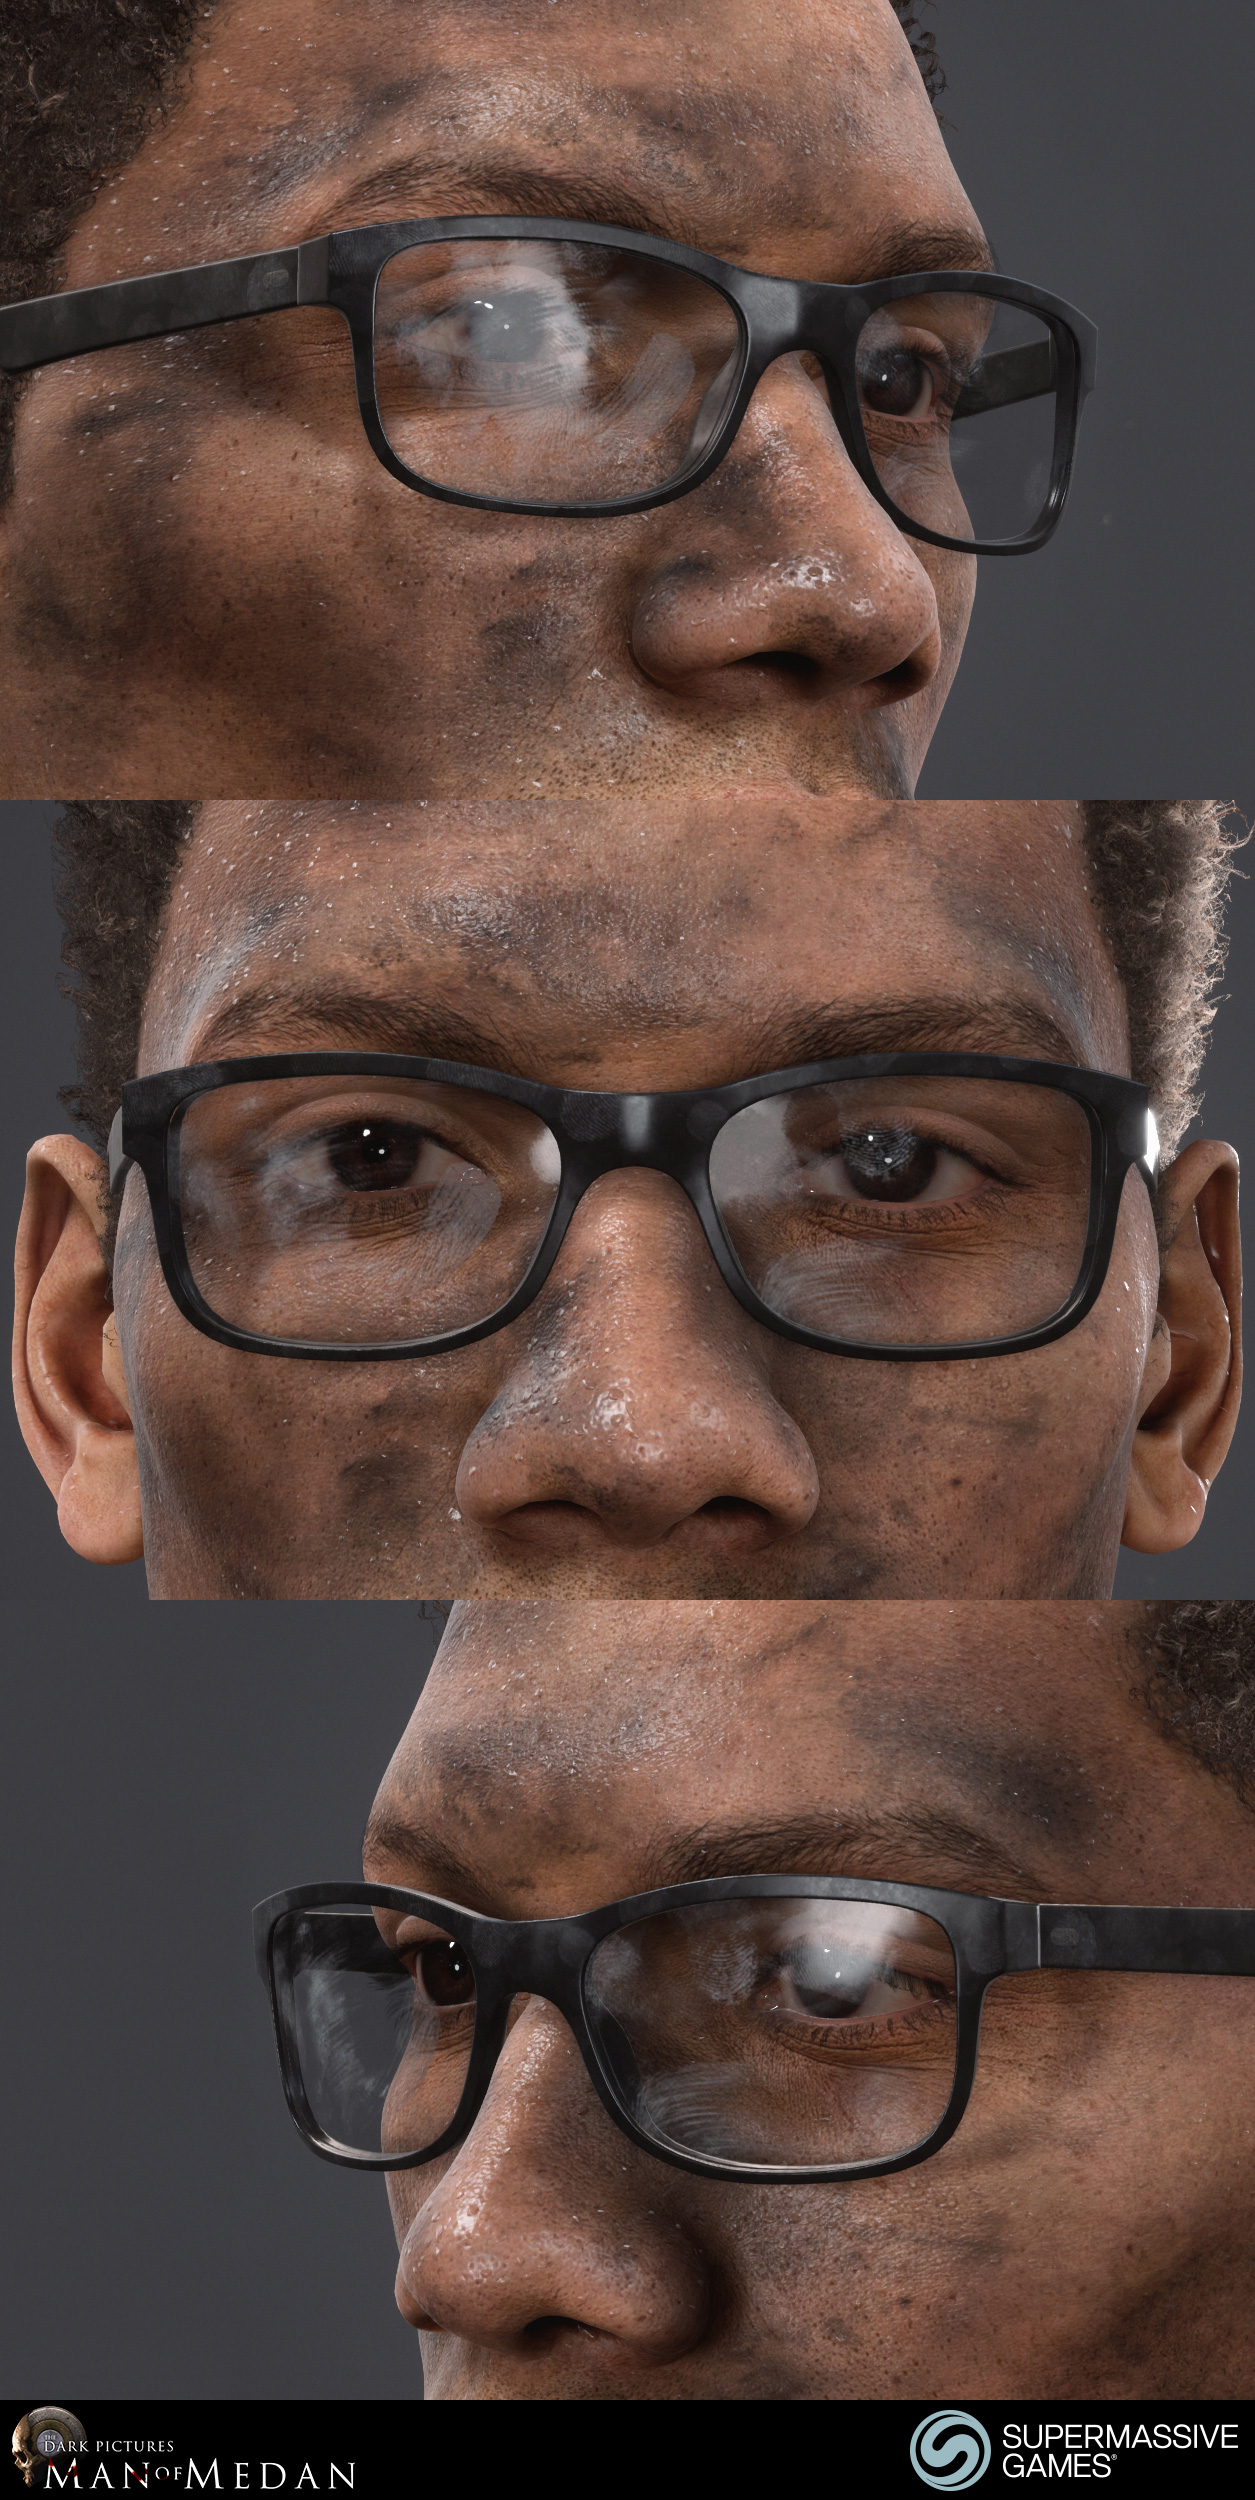 Brad is character from The Dark Pictures - Man of Medan game in Unreal Engine. Dirty face and glasses.